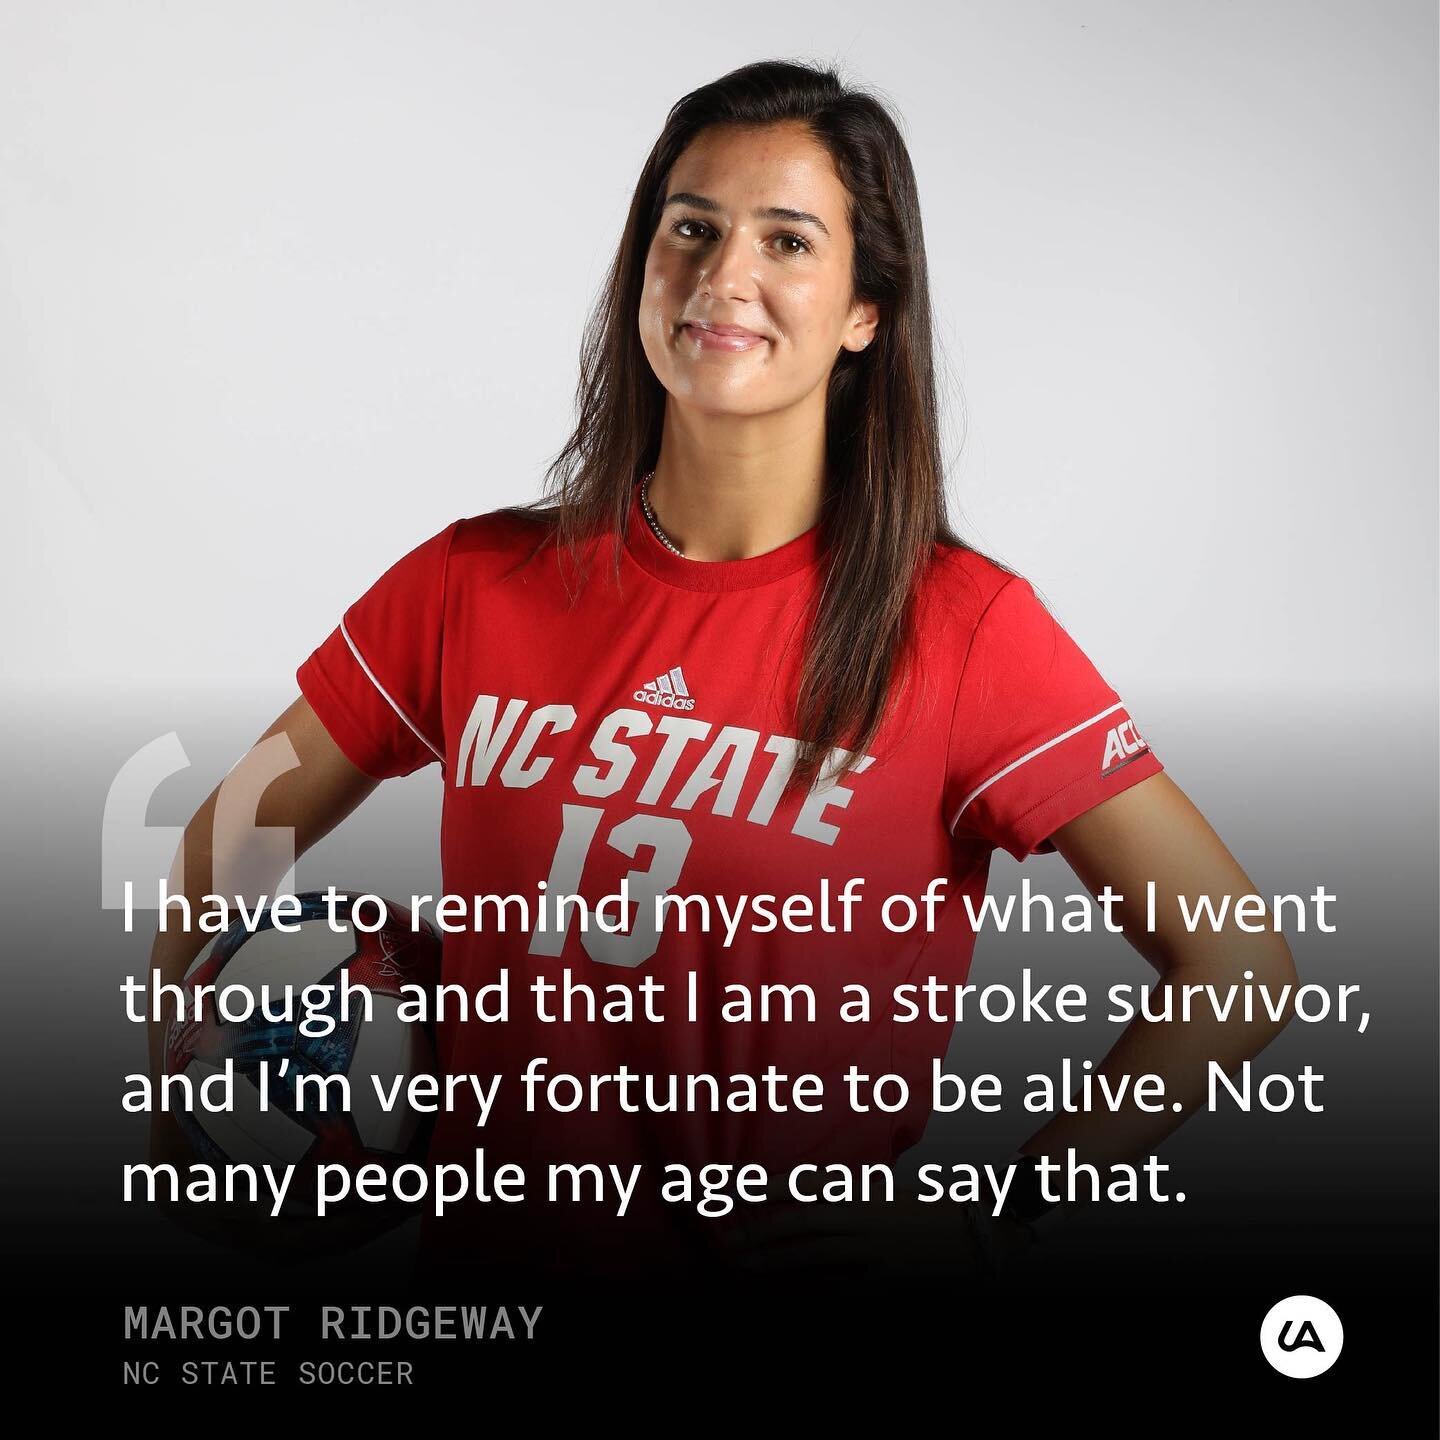 On June 23, 2020, Margot Ridgeway suffered a stroke. Despite showing multiple signs, Margot&rsquo;s stroke was undiagnosed by multiple doctors. After months of recovery, Margot returned to the field and played a full 90 minutes. Now, she&rsquo;s on a